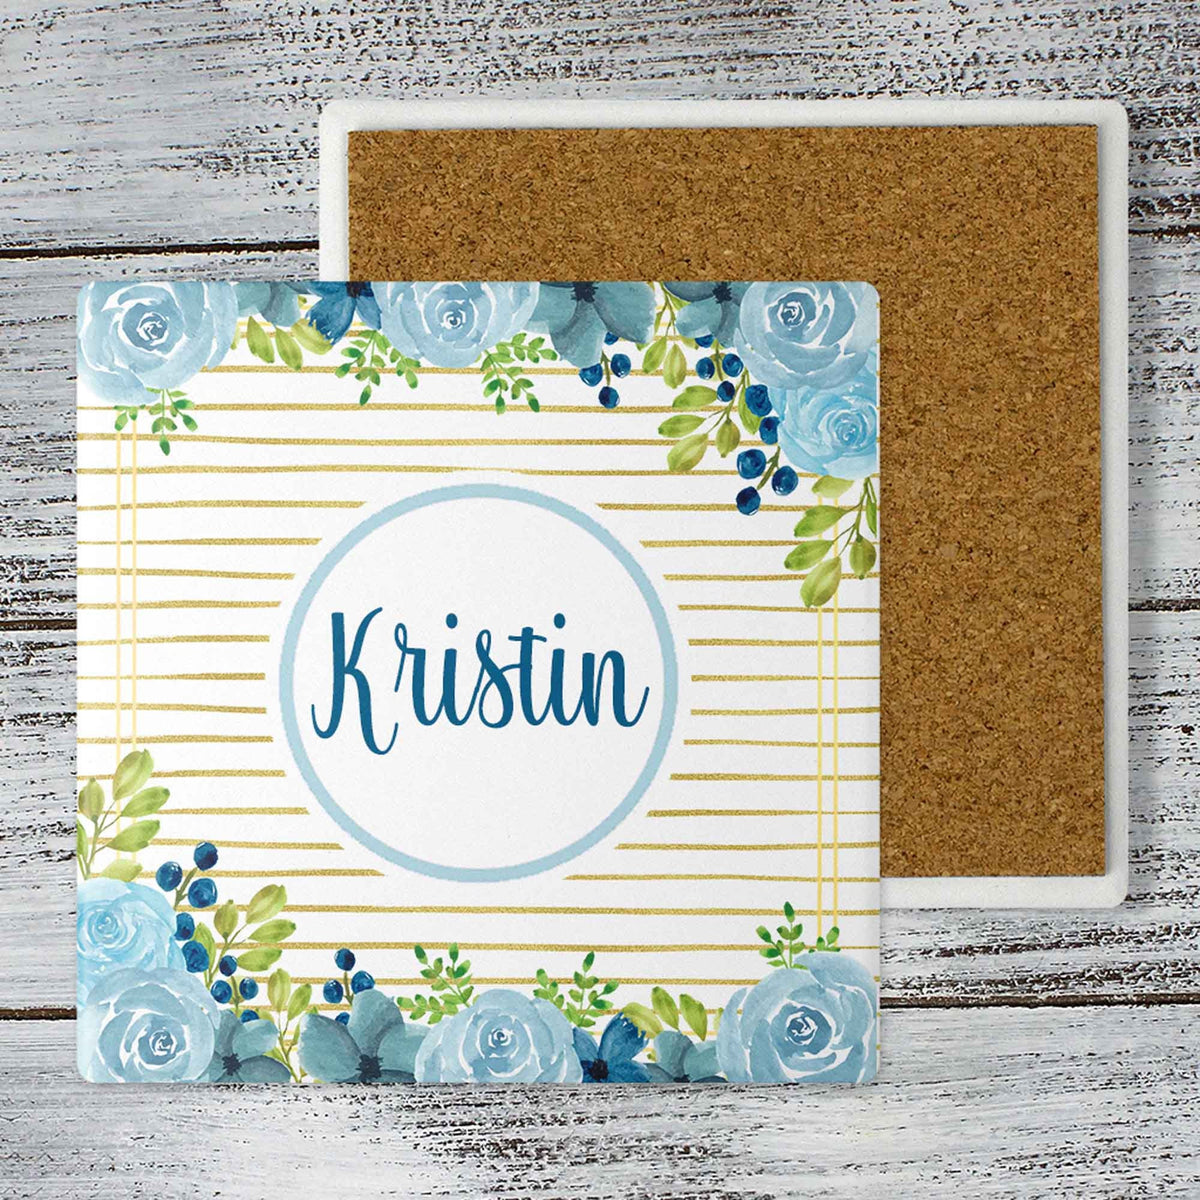 Personalized Coasters | Custom Stone Coaster Set | Blue and Gold Floral | Set of 4